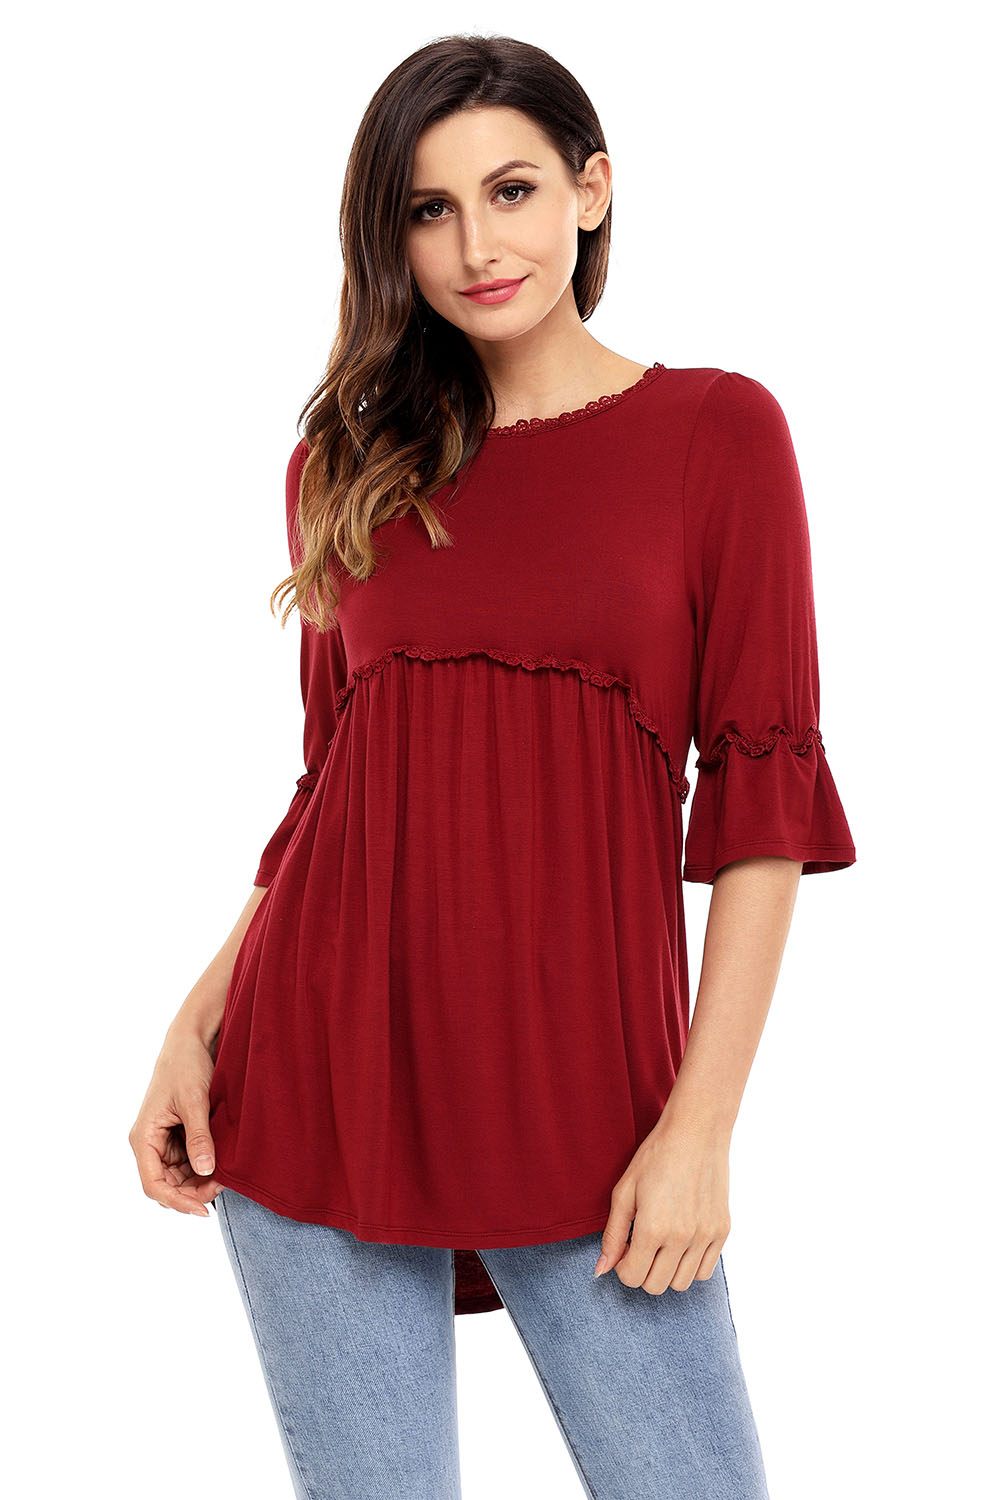 BY250232-3 Claret Babydoll Long Tunic Top